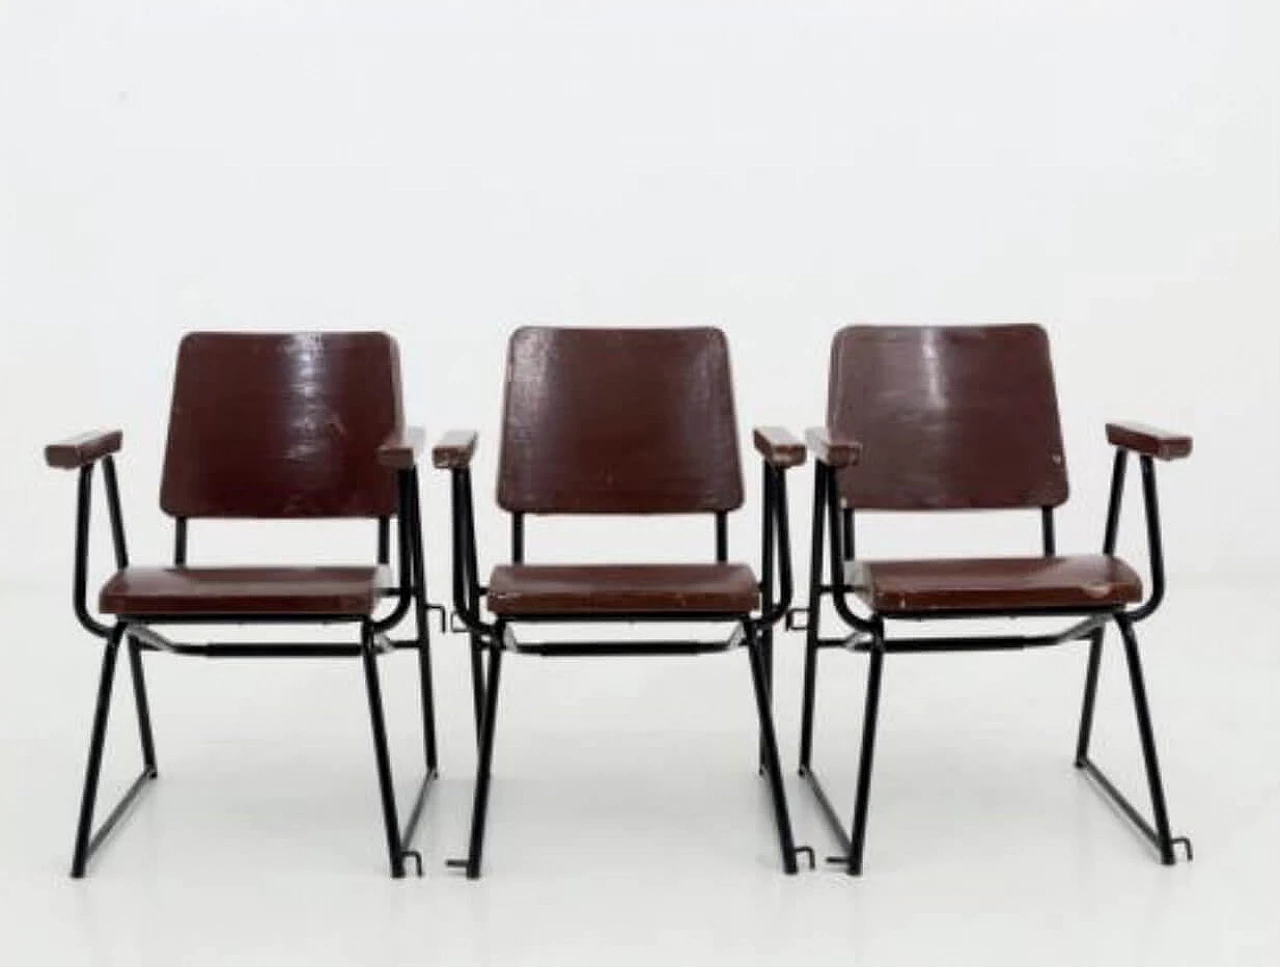 12 Chairs in lacquered wood and iron rodby by BBPR for Michelin Sport Club D.A.M.I., 30s 1197993